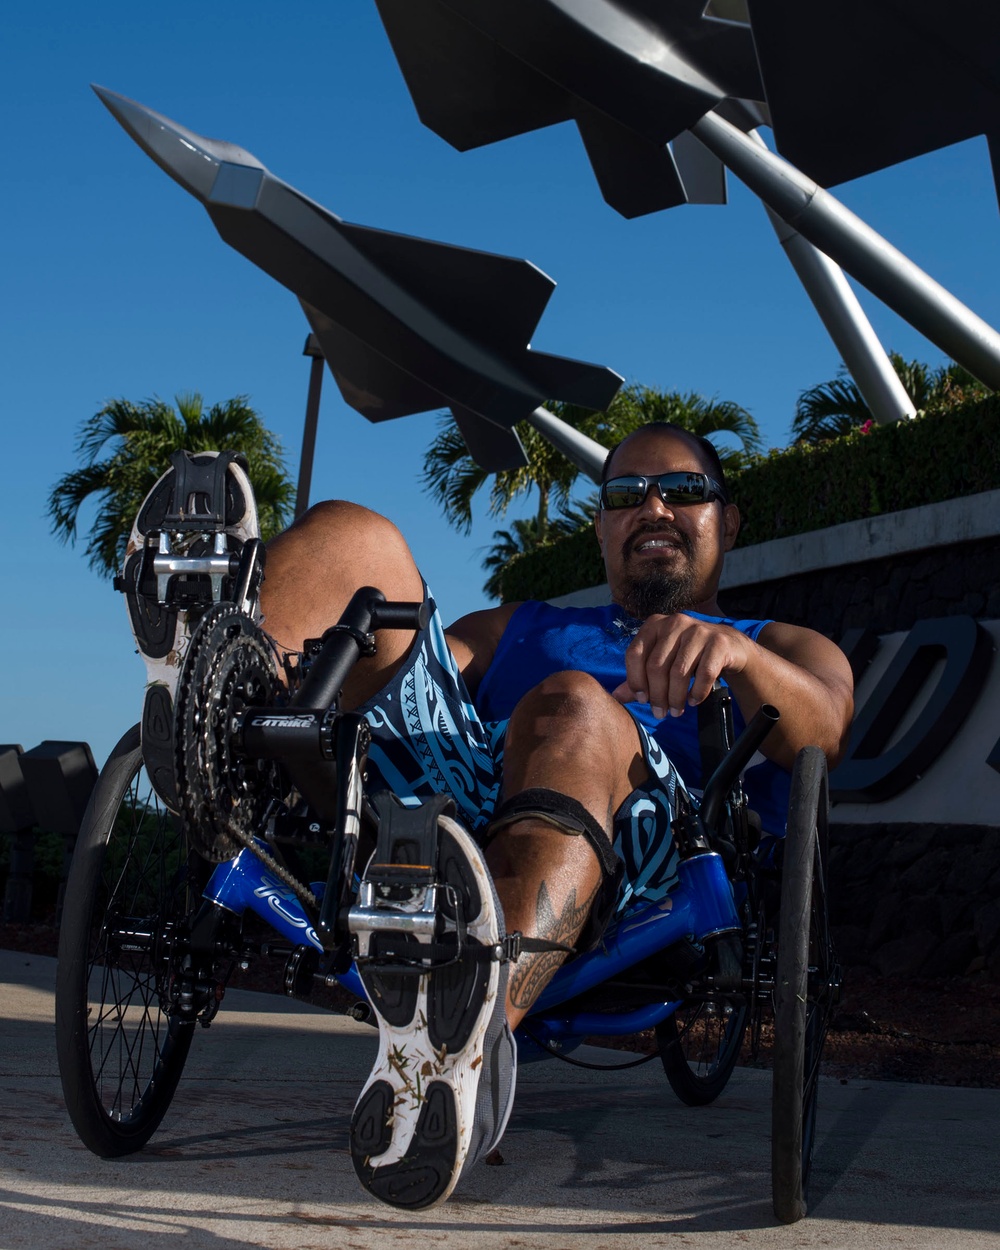 Overcoming injuries, heading to Wounded Warrior Games